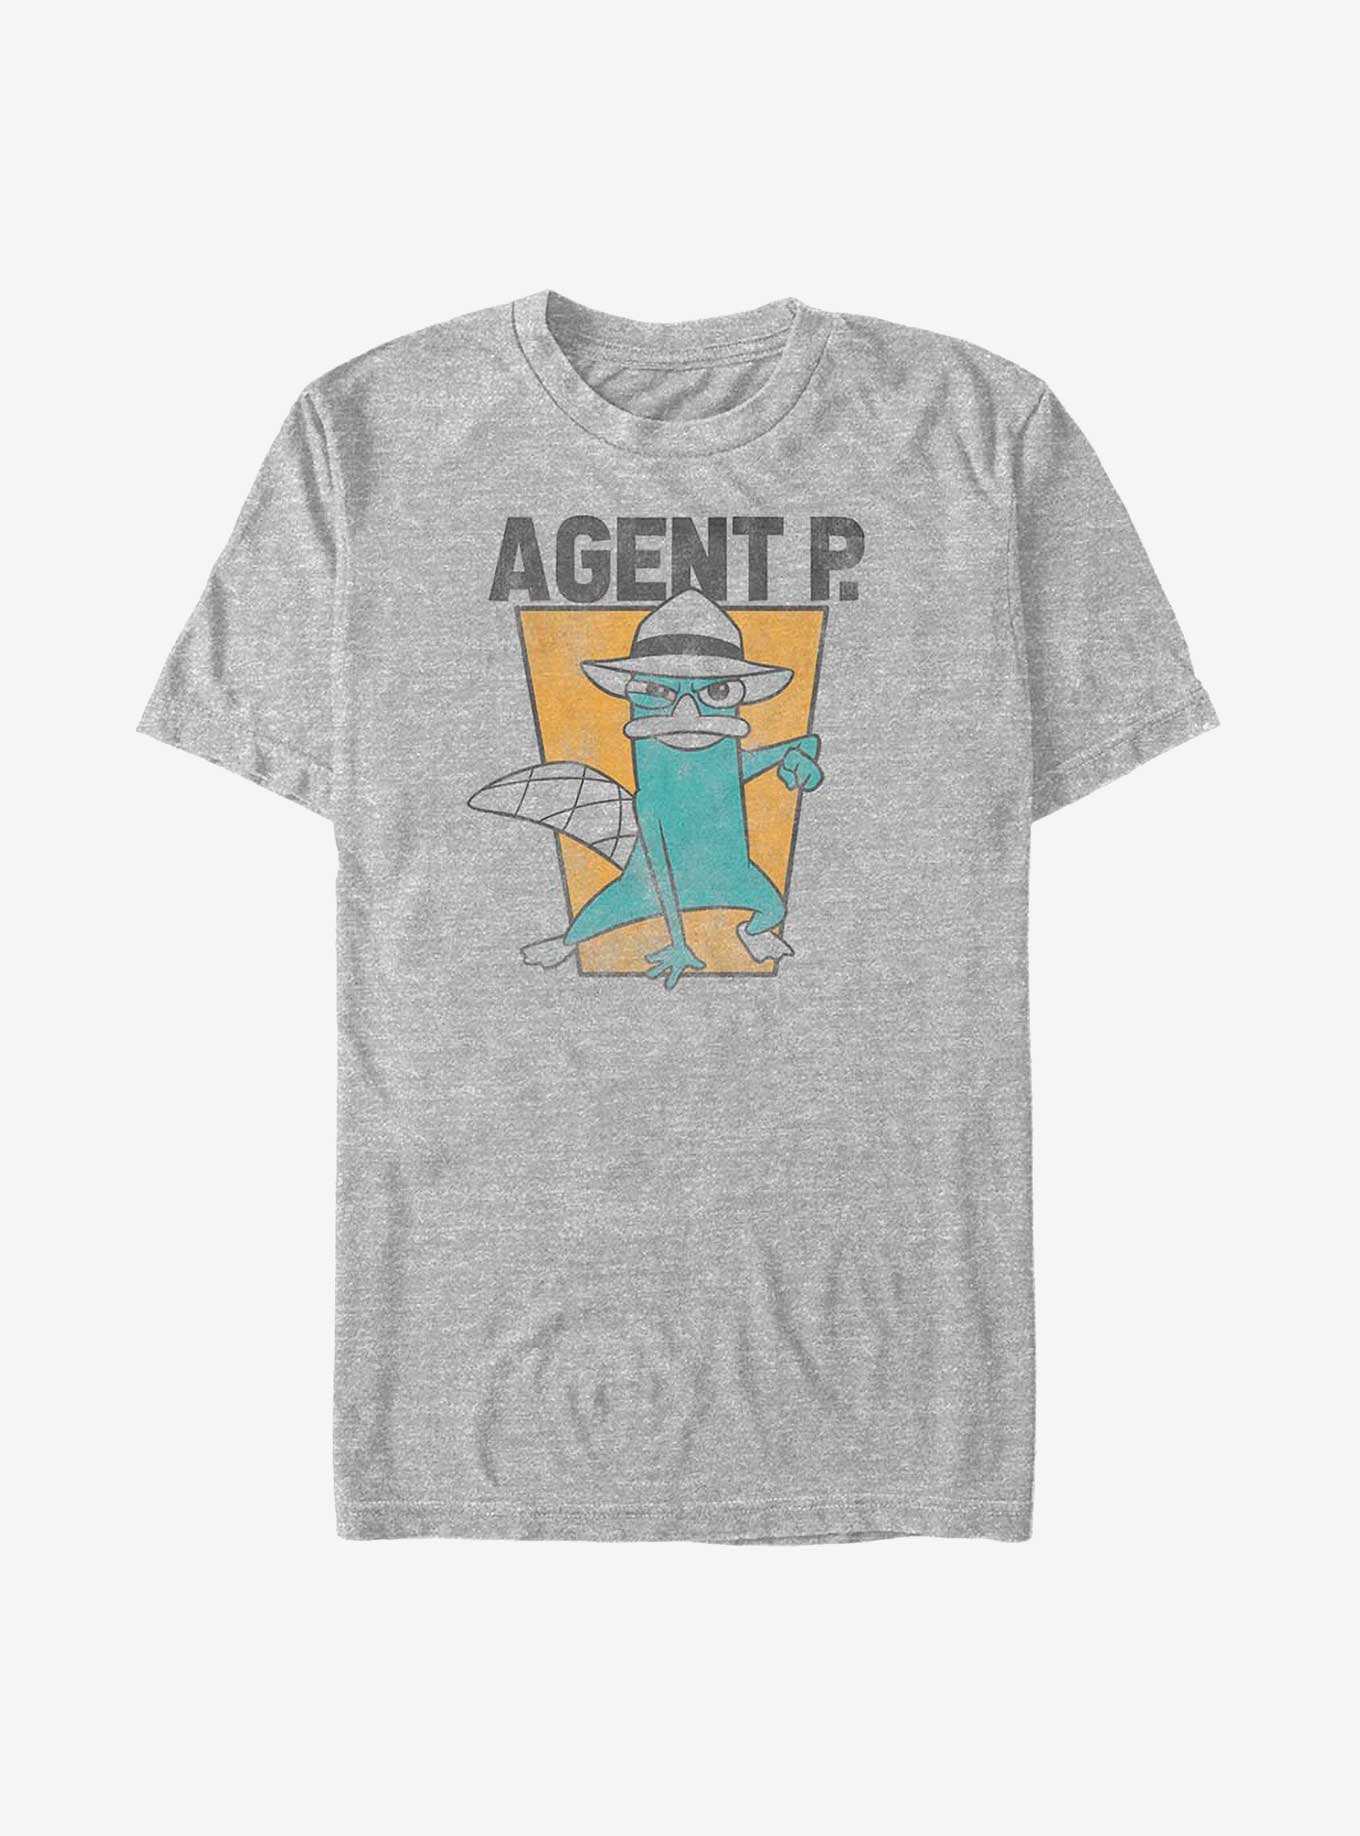 Disney Phineas And Ferb Agent P Big & Tall T-Shirt, , hi-res